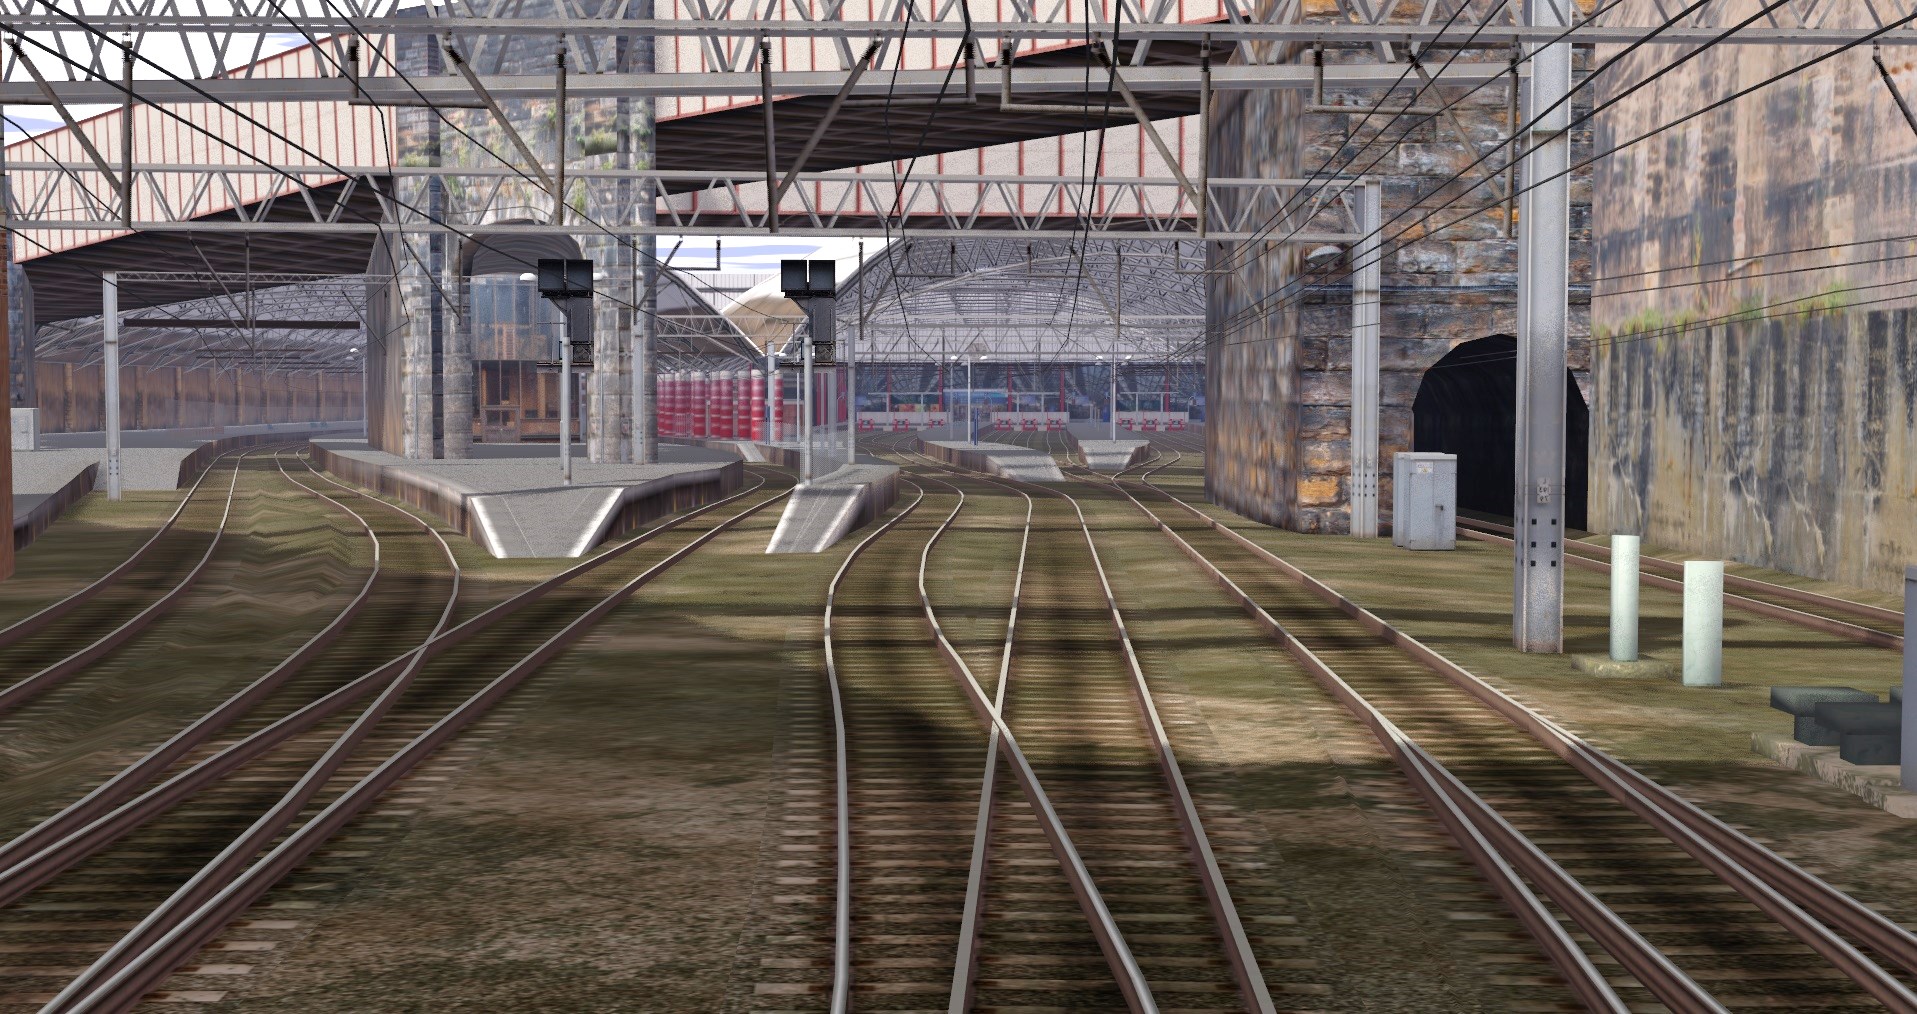 Existing platform virtual reality view at Lime Street